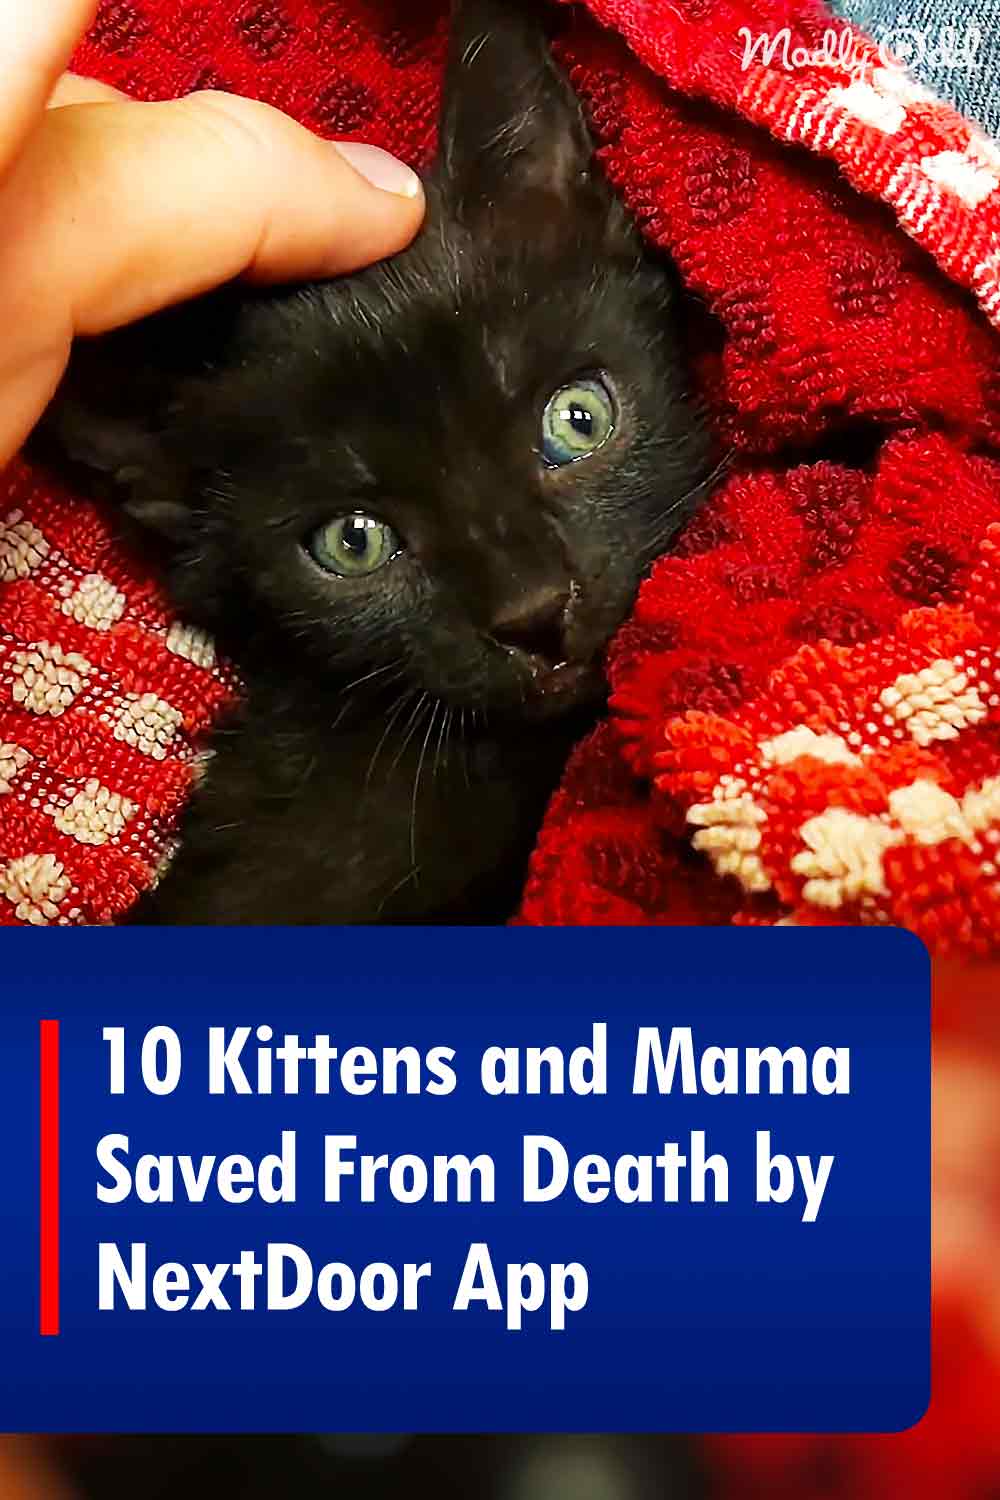 10 Kittens and Mama Saved From Death by NextDoor App